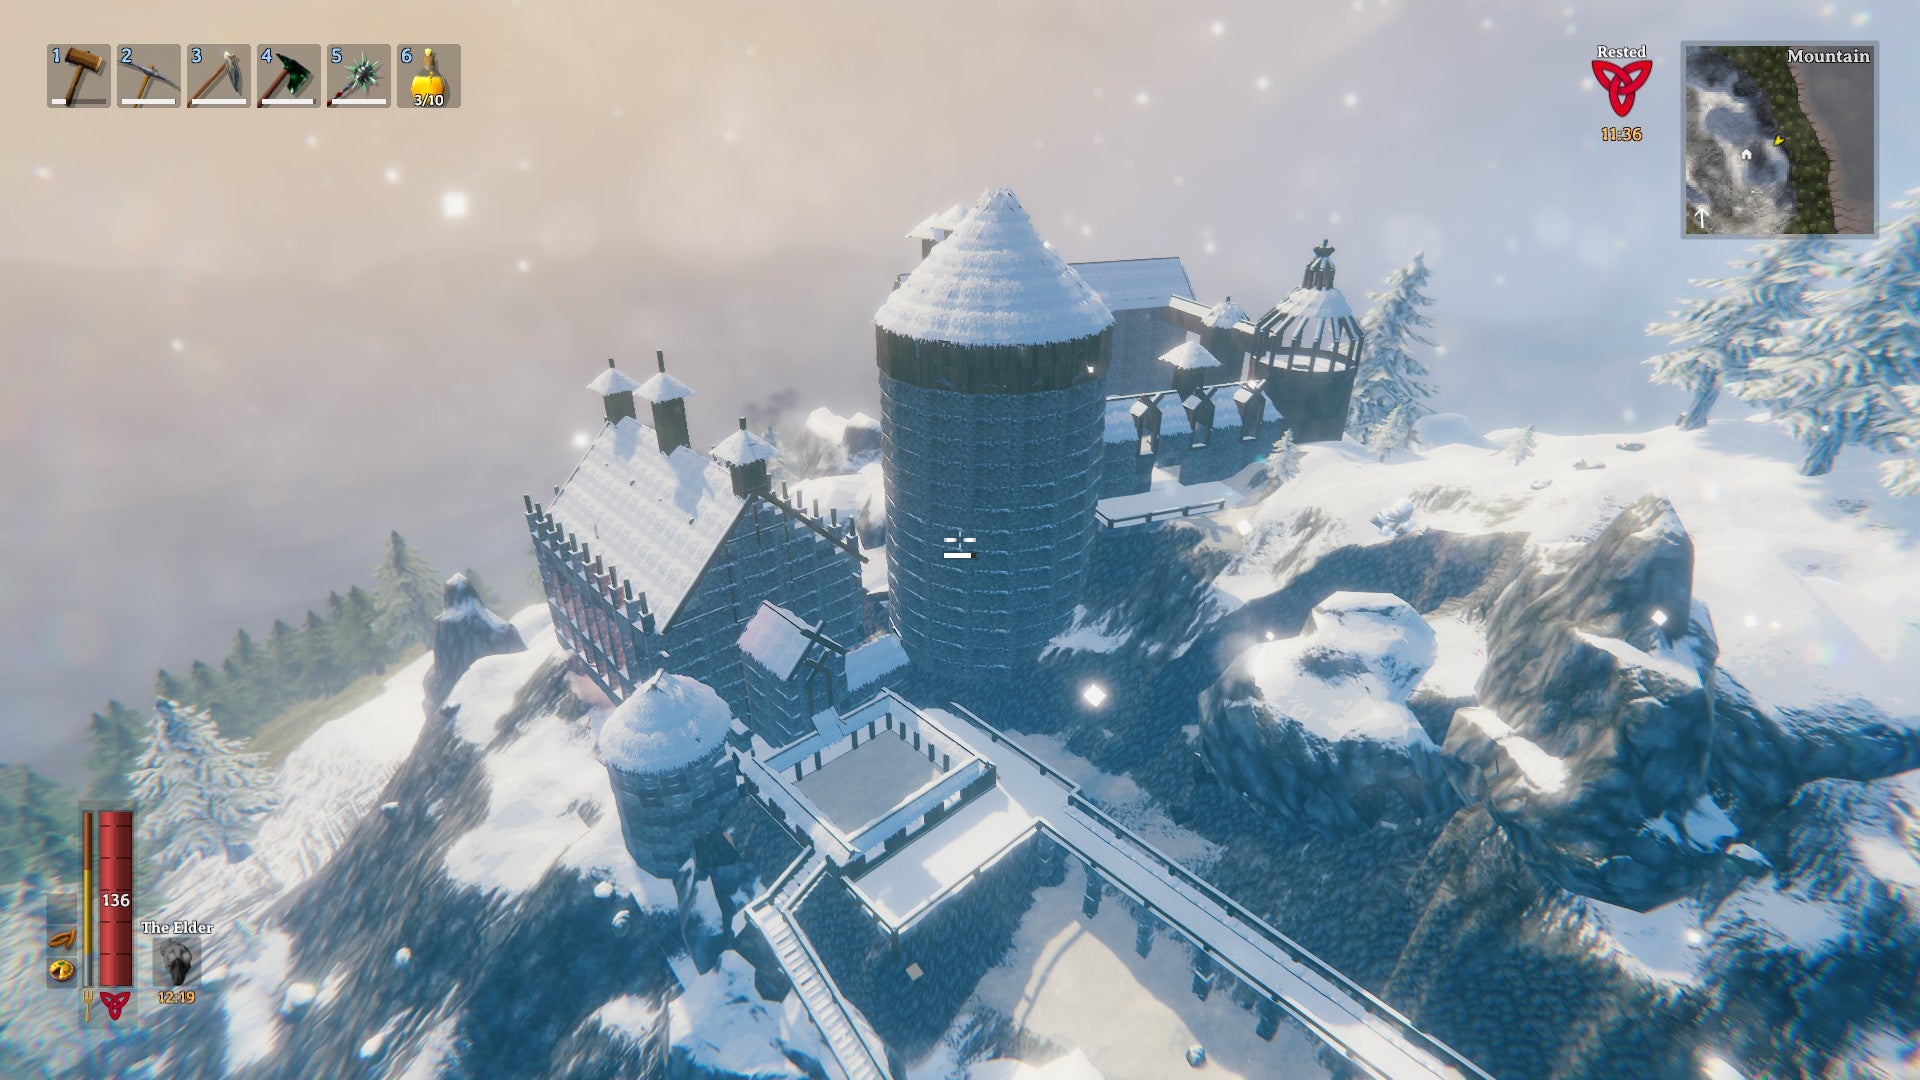 Redditor Zabore began recreating Hogwarts School of Witchcraft and Wizardry from the “Harry Potter” films in the new survival game “Valheim.”